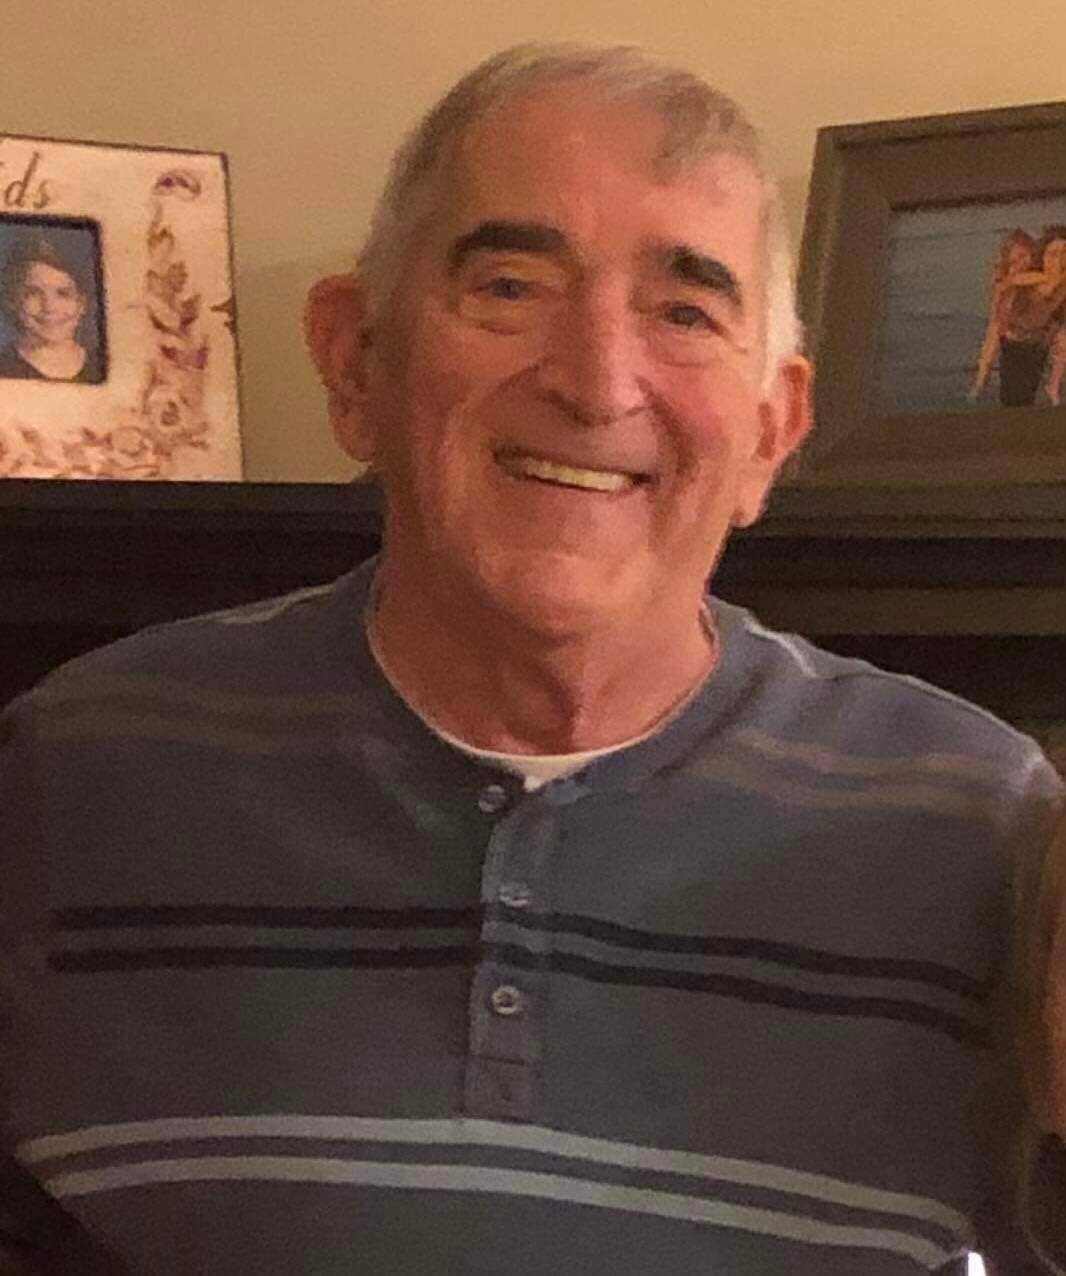 Friends of JOE BREEN ( 1943-2020) 4 Ball, 9 hole, free, &ldquo;FUN&rdquo; Scramble will be held on Thursday, September 14, 2023, at the Miramichi Golf Club.

Tee times start at 3:00 PM. Mulligans will be open after golfing to honour Joe,  and to orde